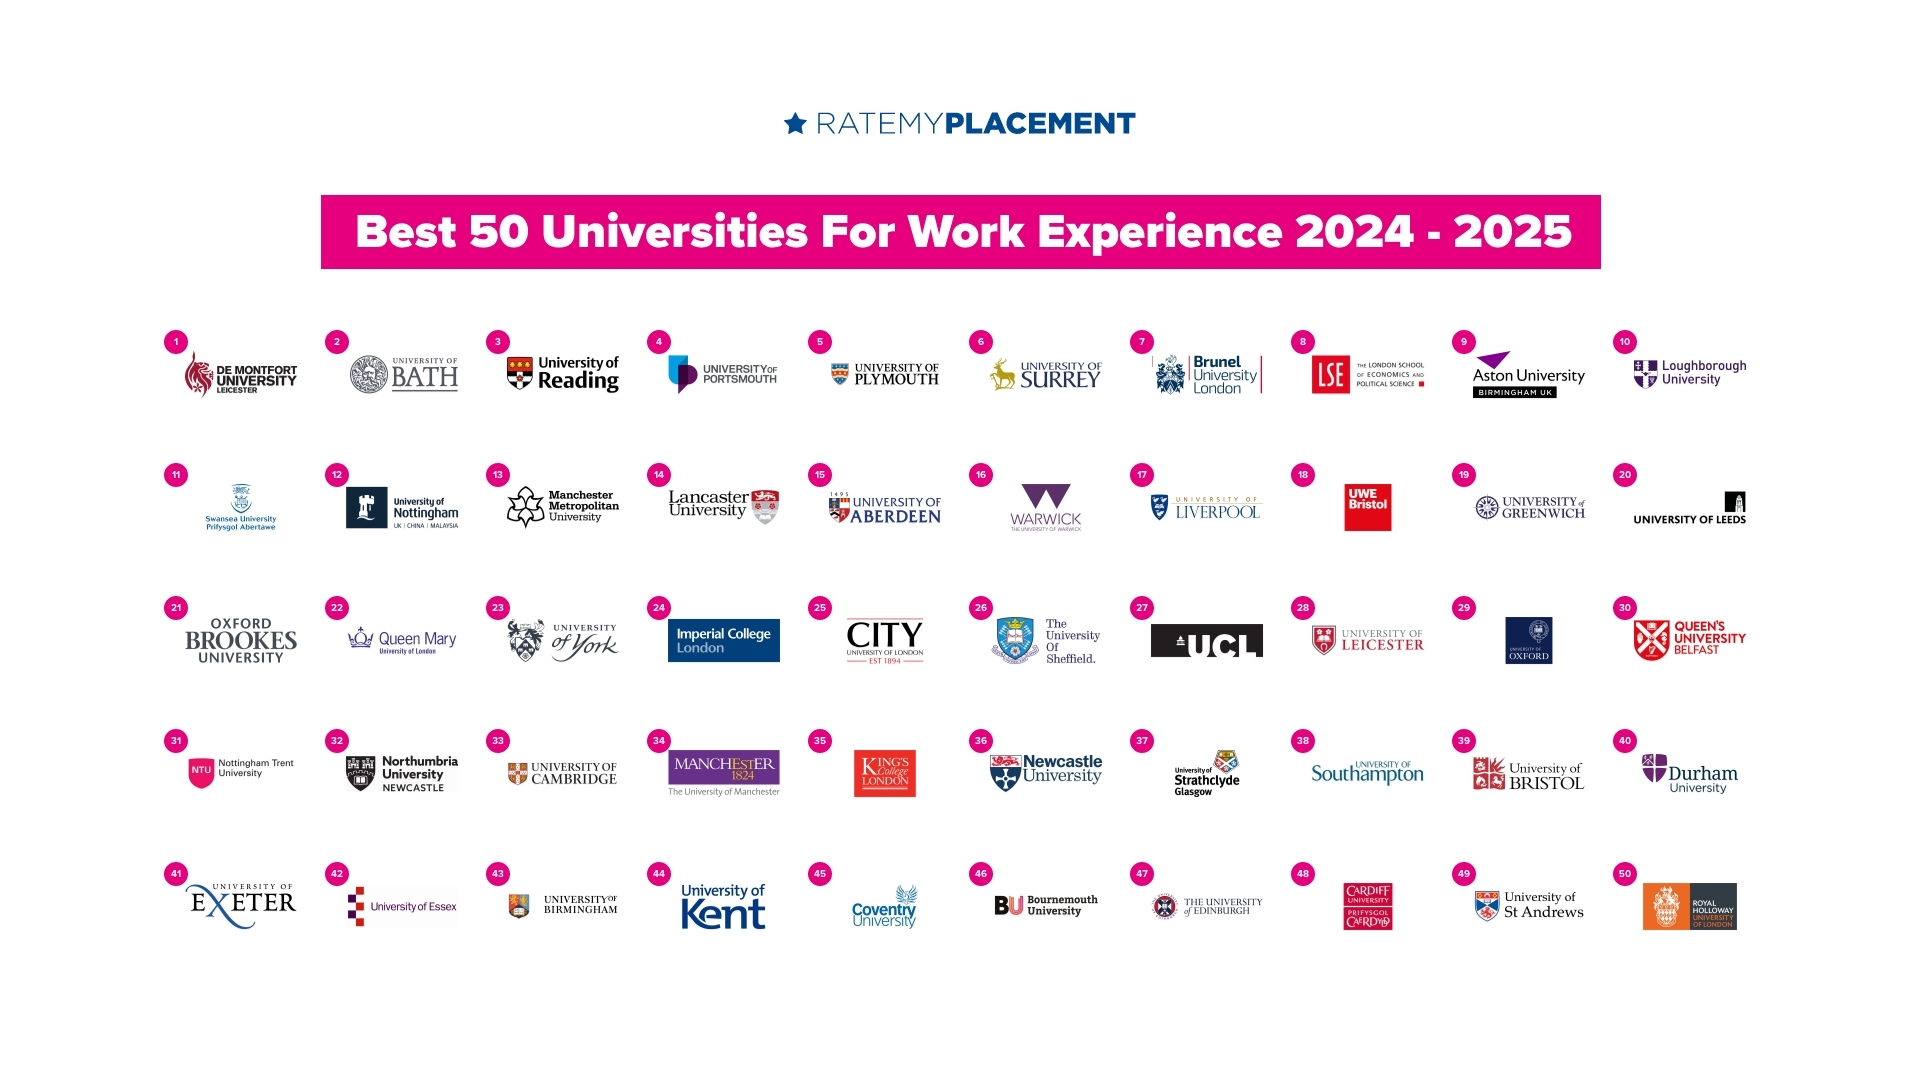 A list of the top 50 universities for Work Experience 2024-2025.